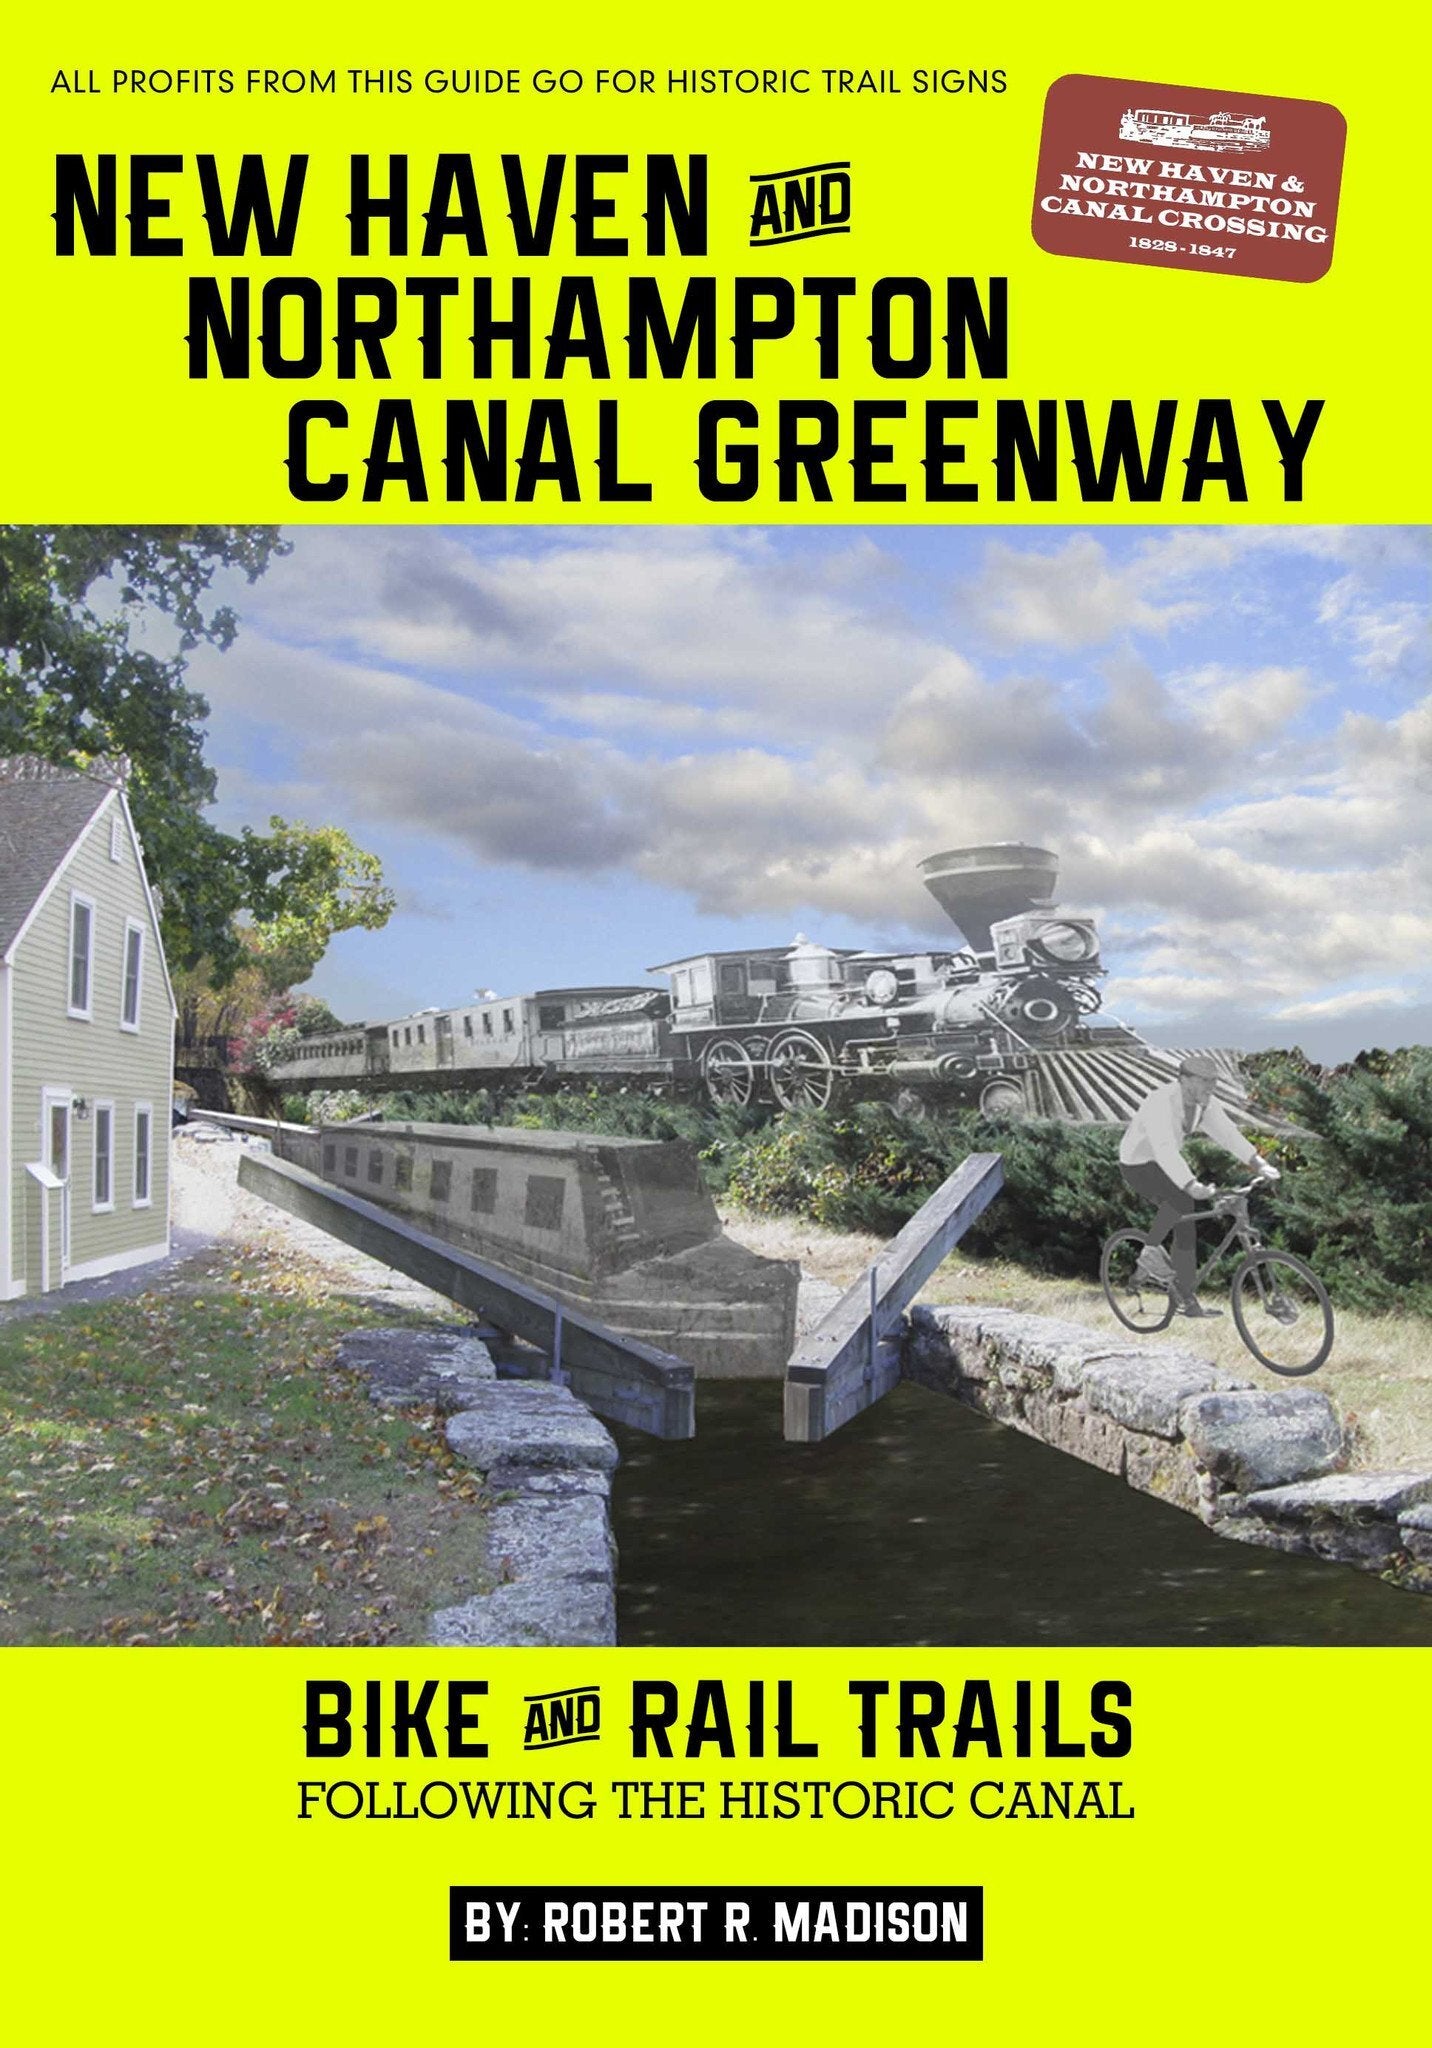 New Haven and Northampton Greenway: Bike and Rail Trails Following the –  Silver Street Media Bookstore